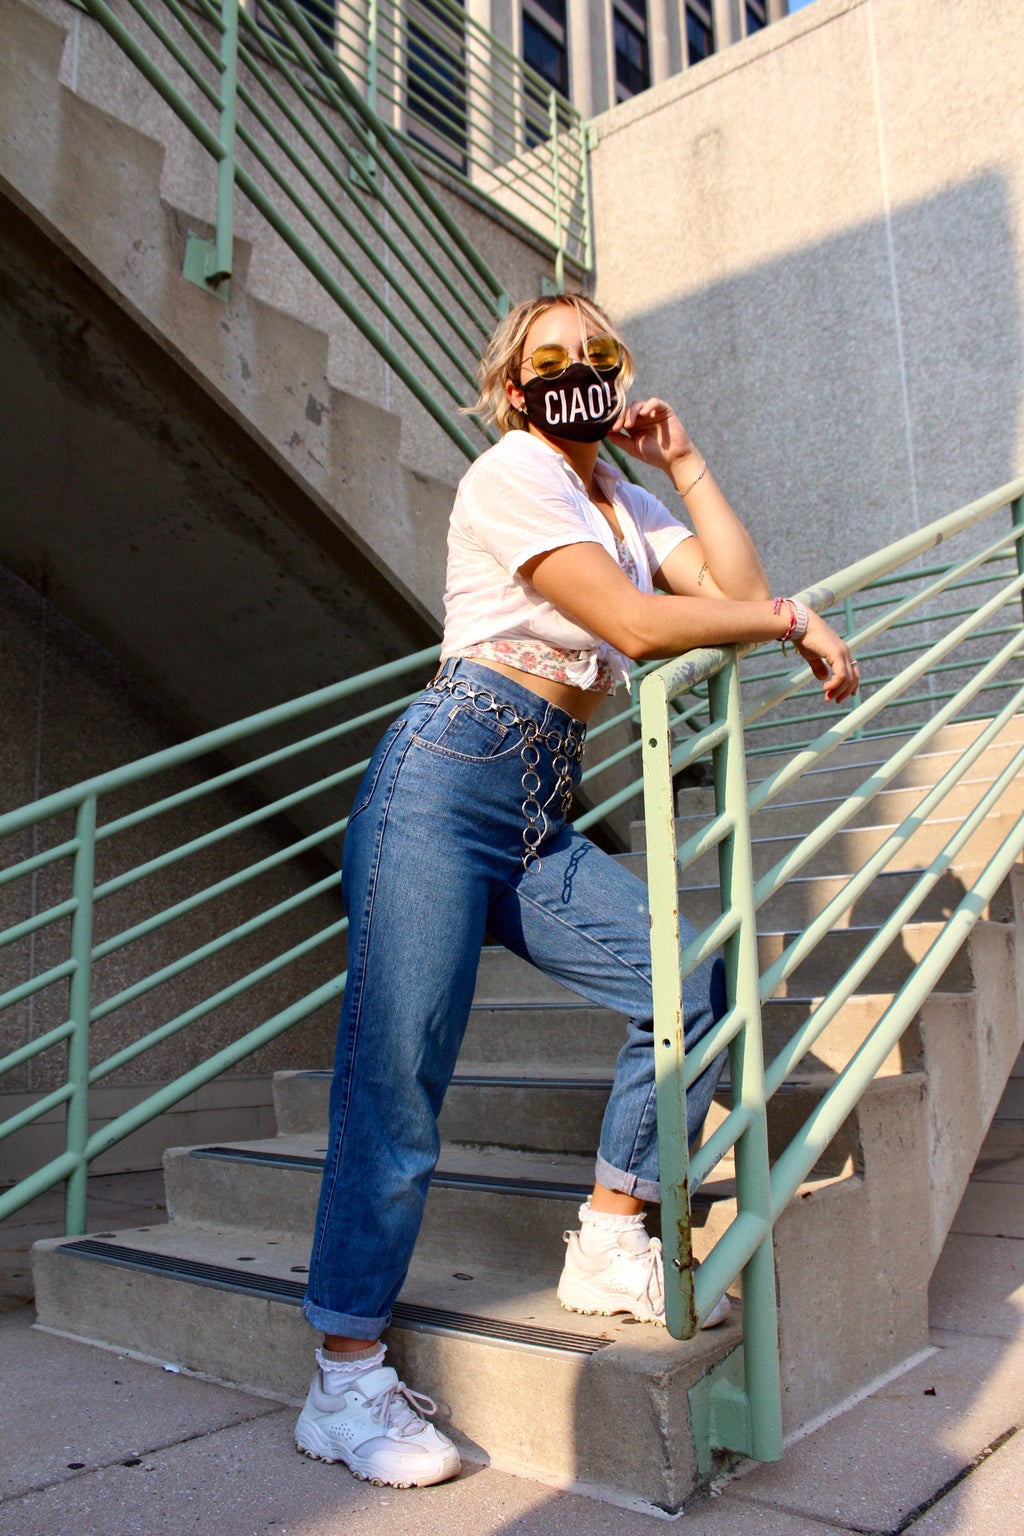 Model poses over stair railing